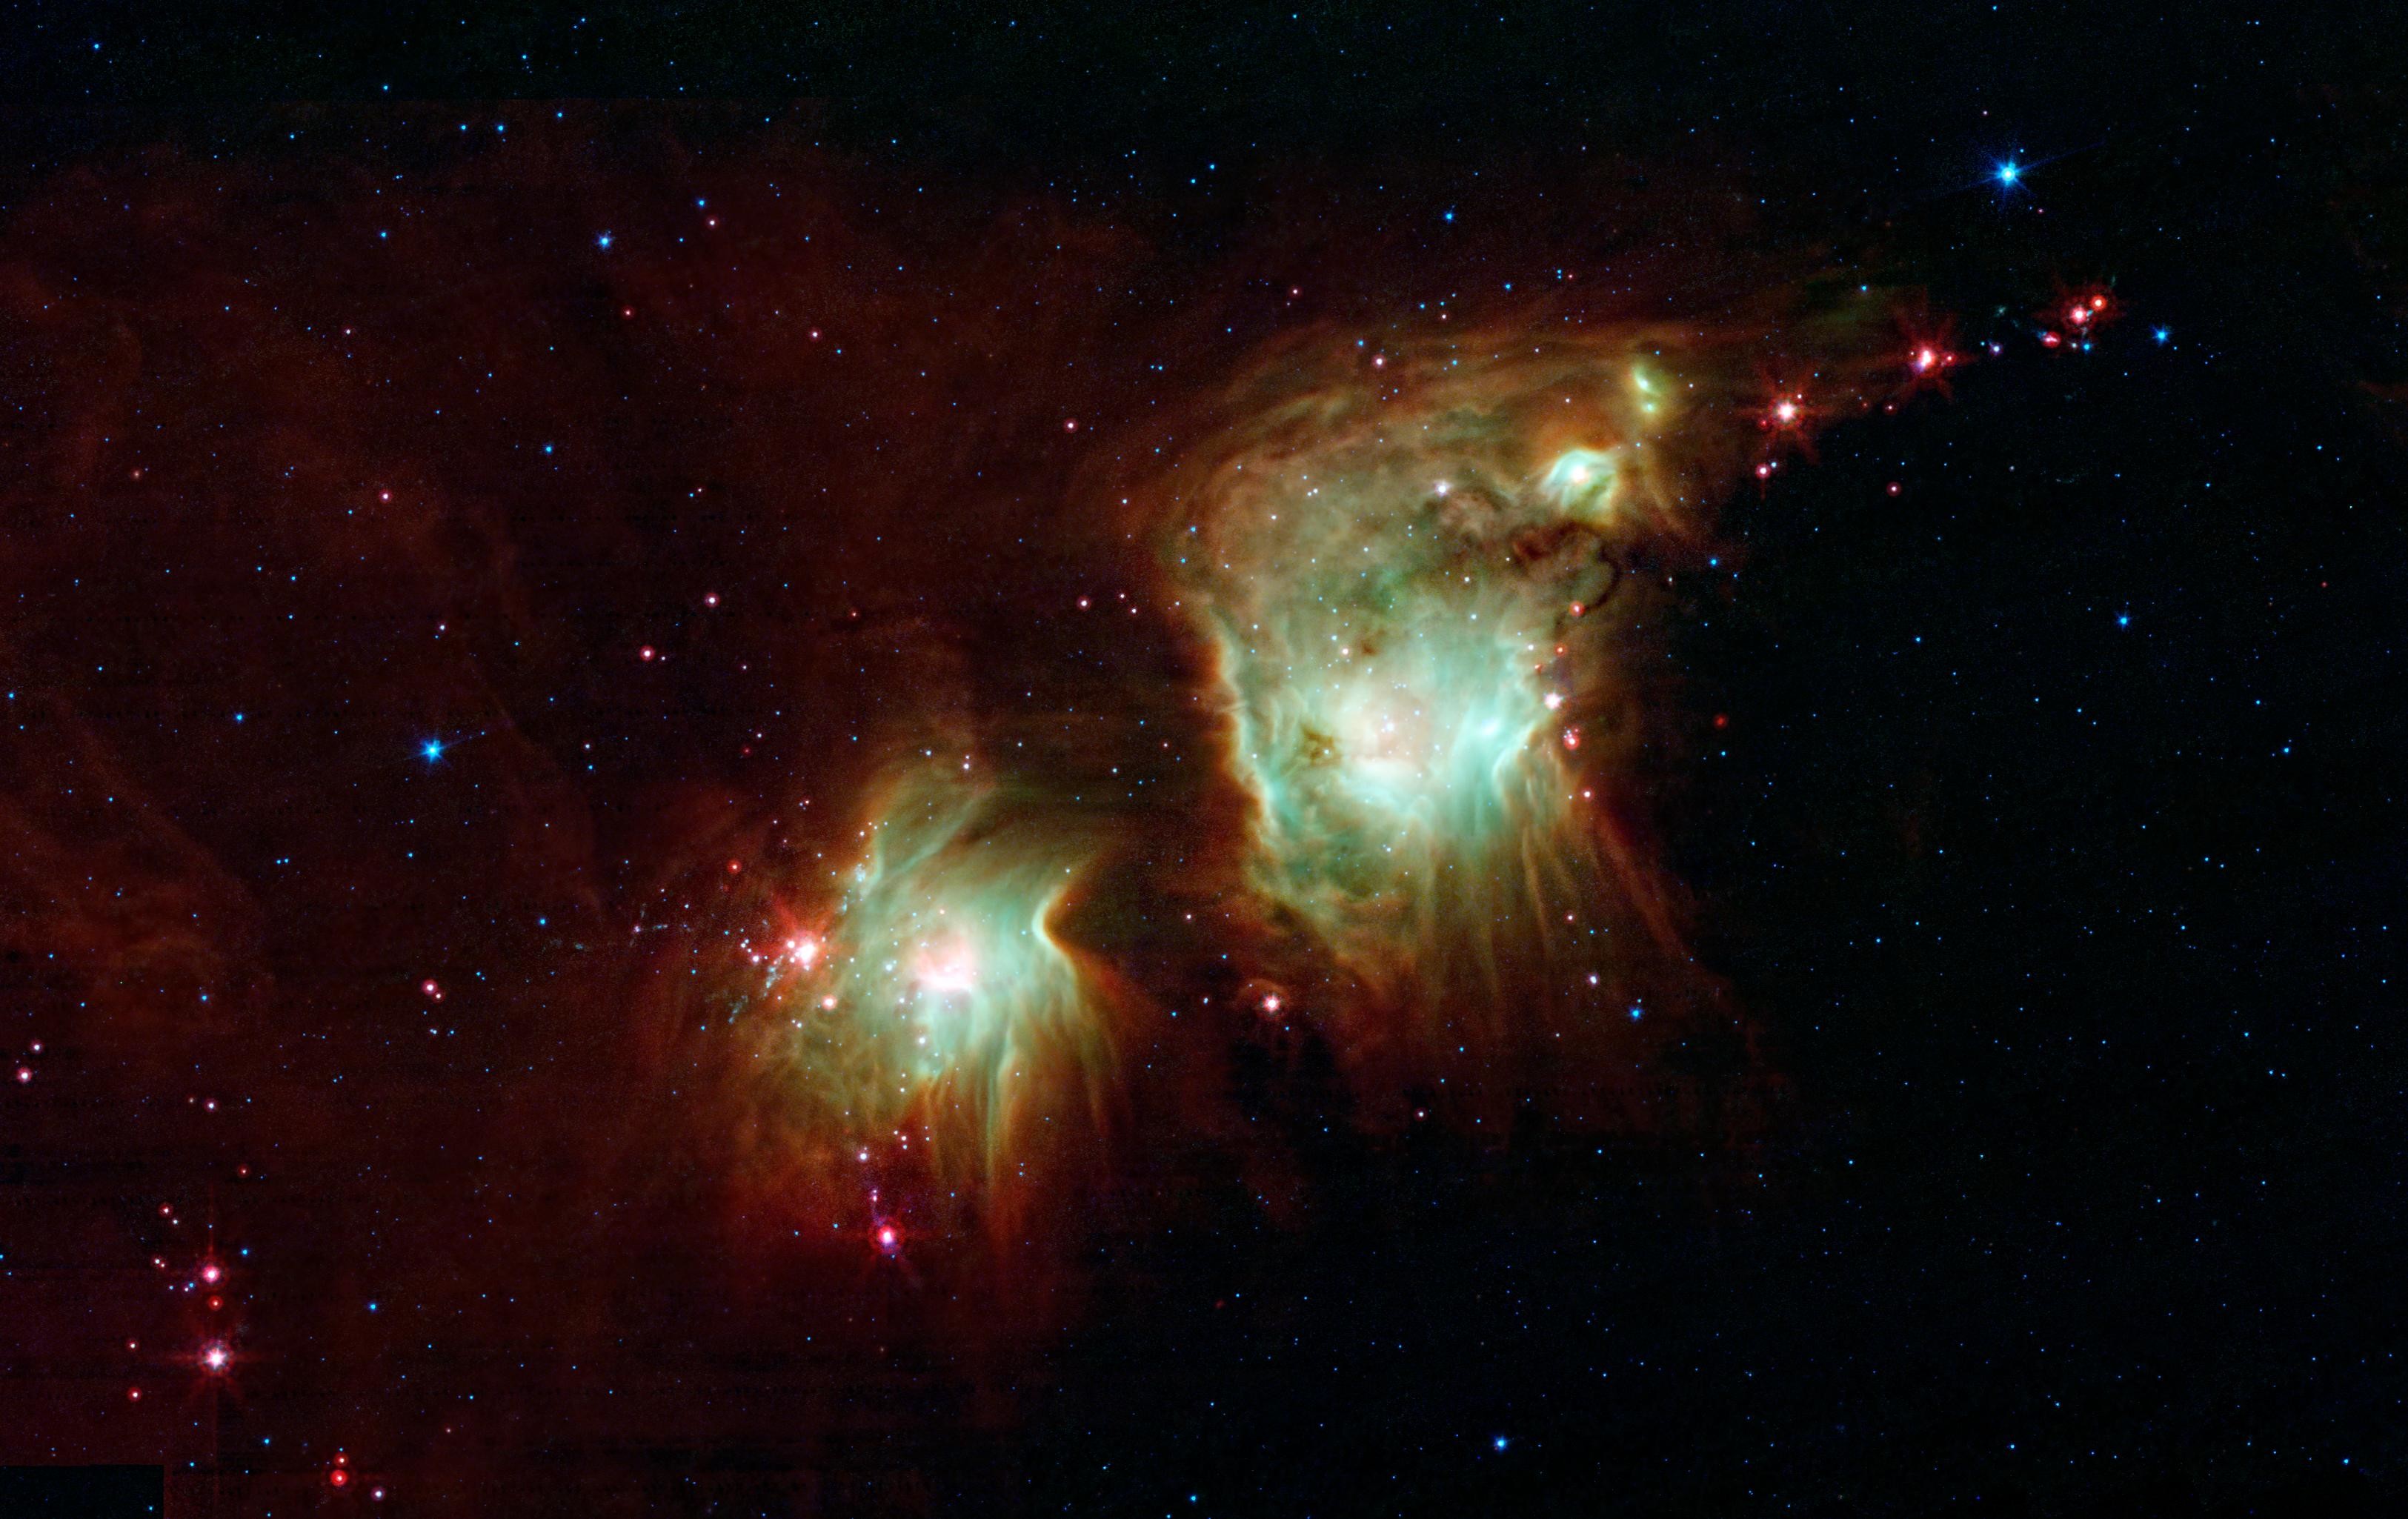 3250x2050 Making a Spectacle of Star Formation in Orion